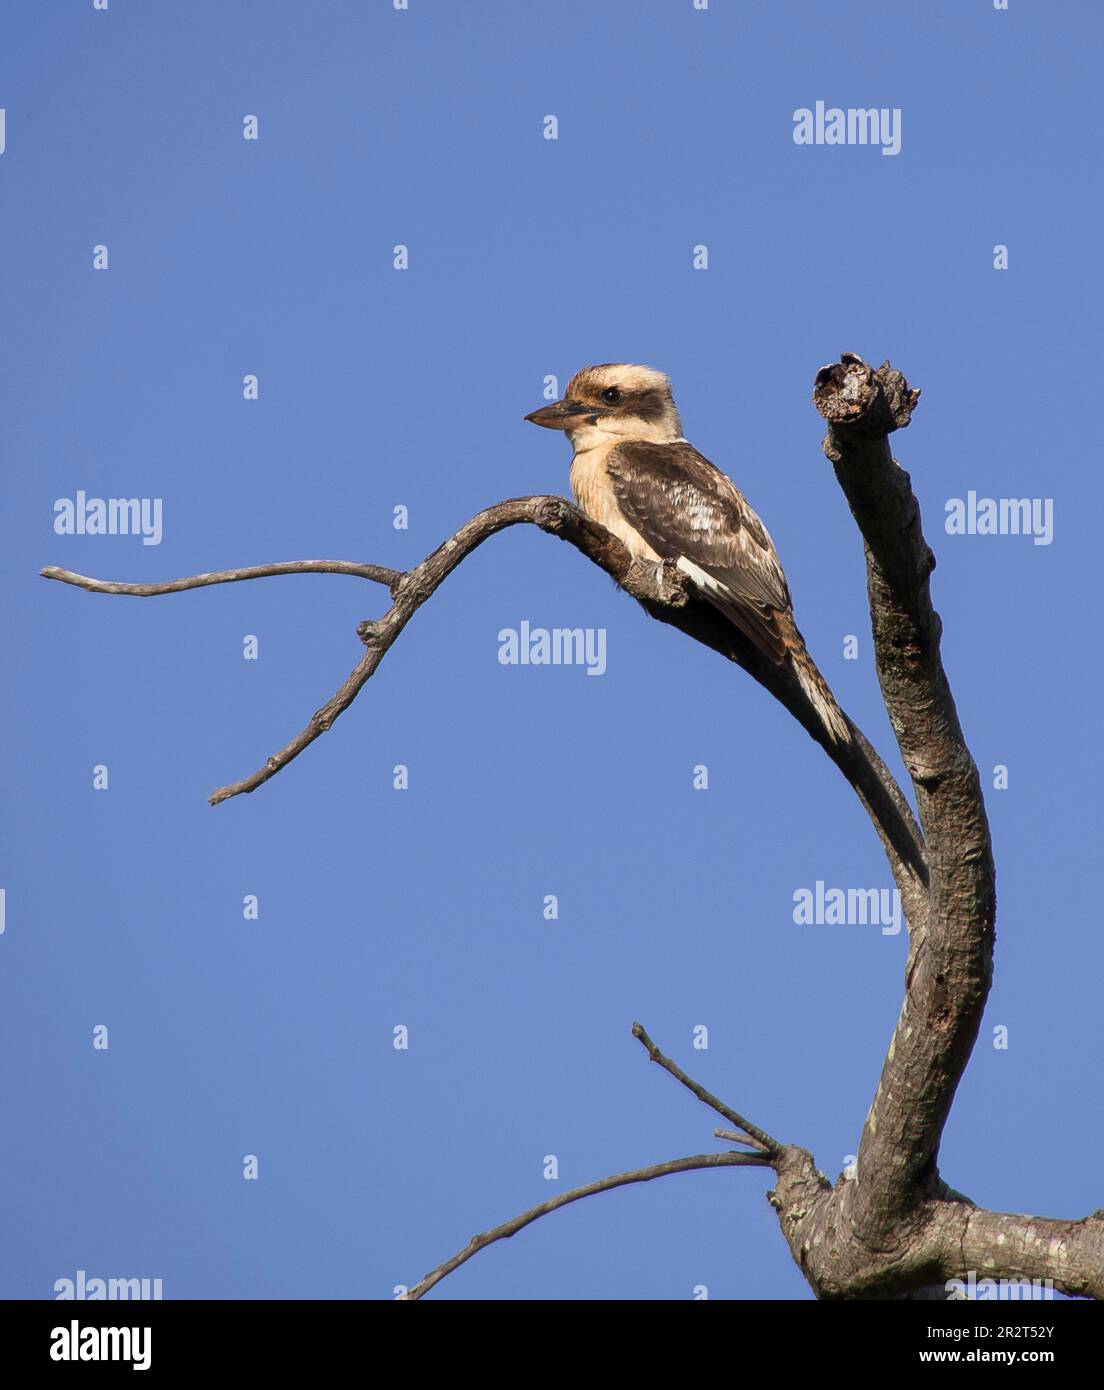 Profile of iconic Australian bird, the laughing kookaburra, dacelo, perched on dead tree branch in Queensland, winter sunlight. Stock Photo